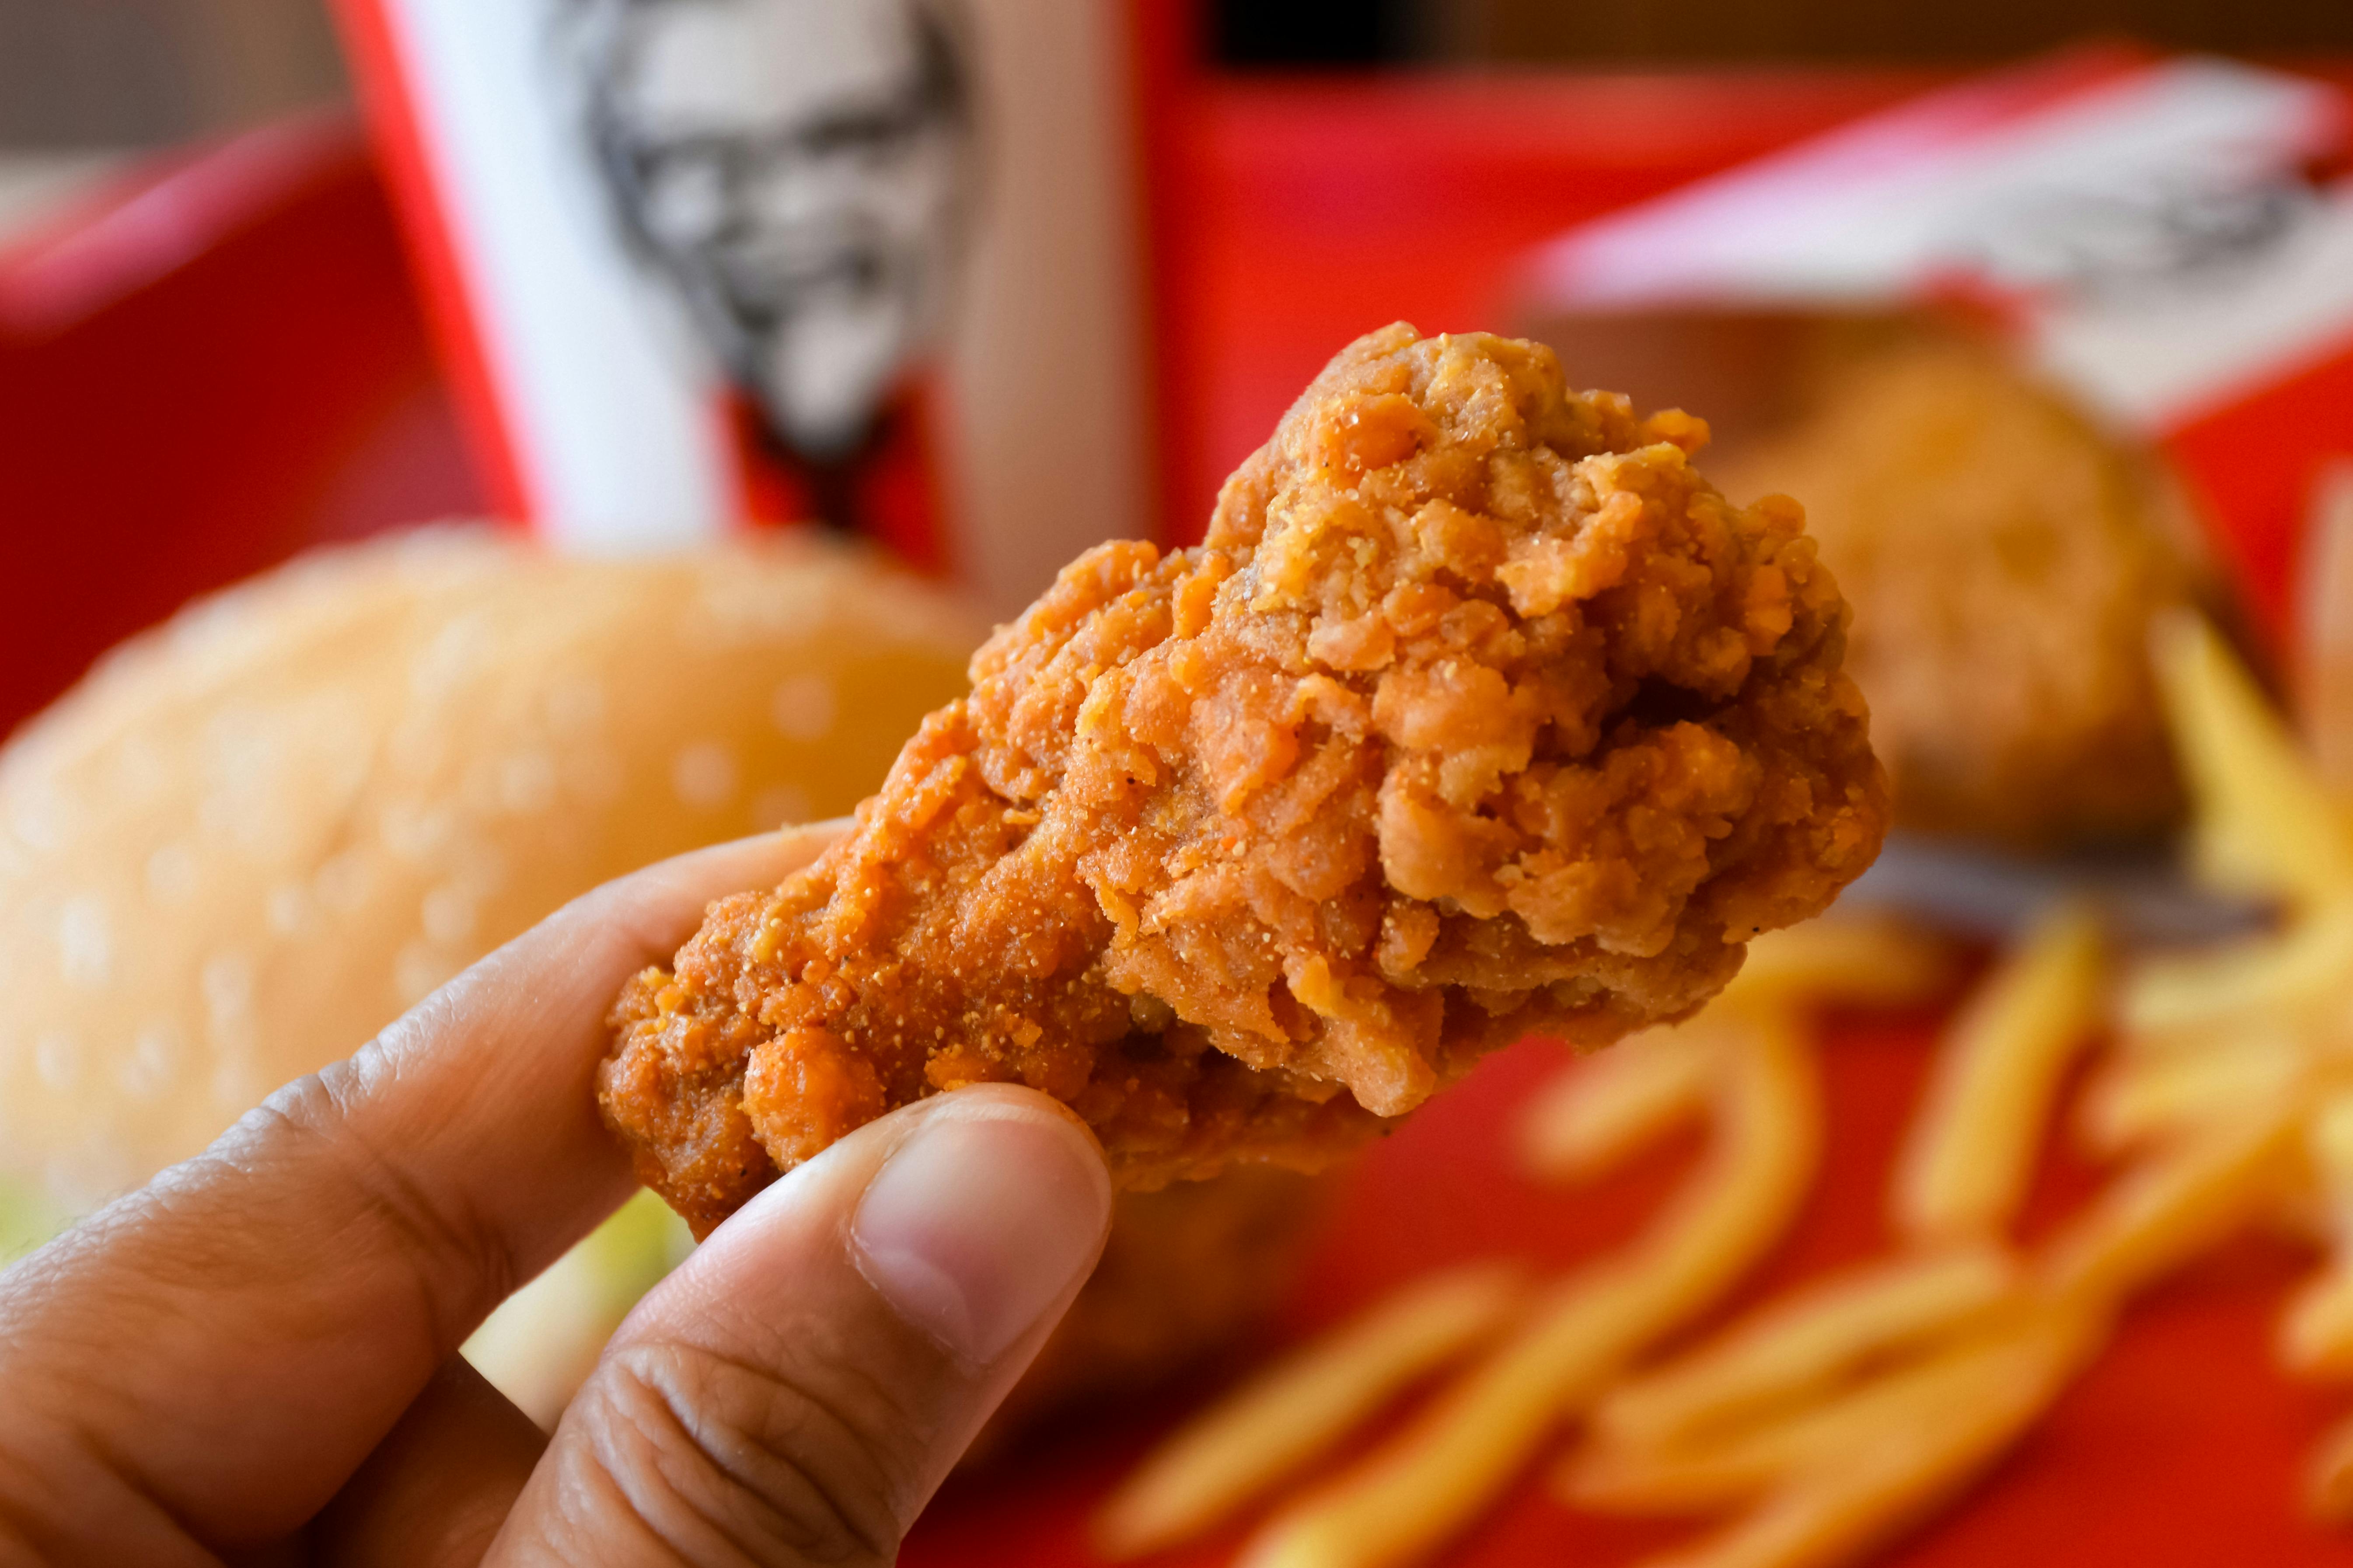 A close of a of chicken wing in a persons hand with other KFC food and a KFC drink cup in the background.